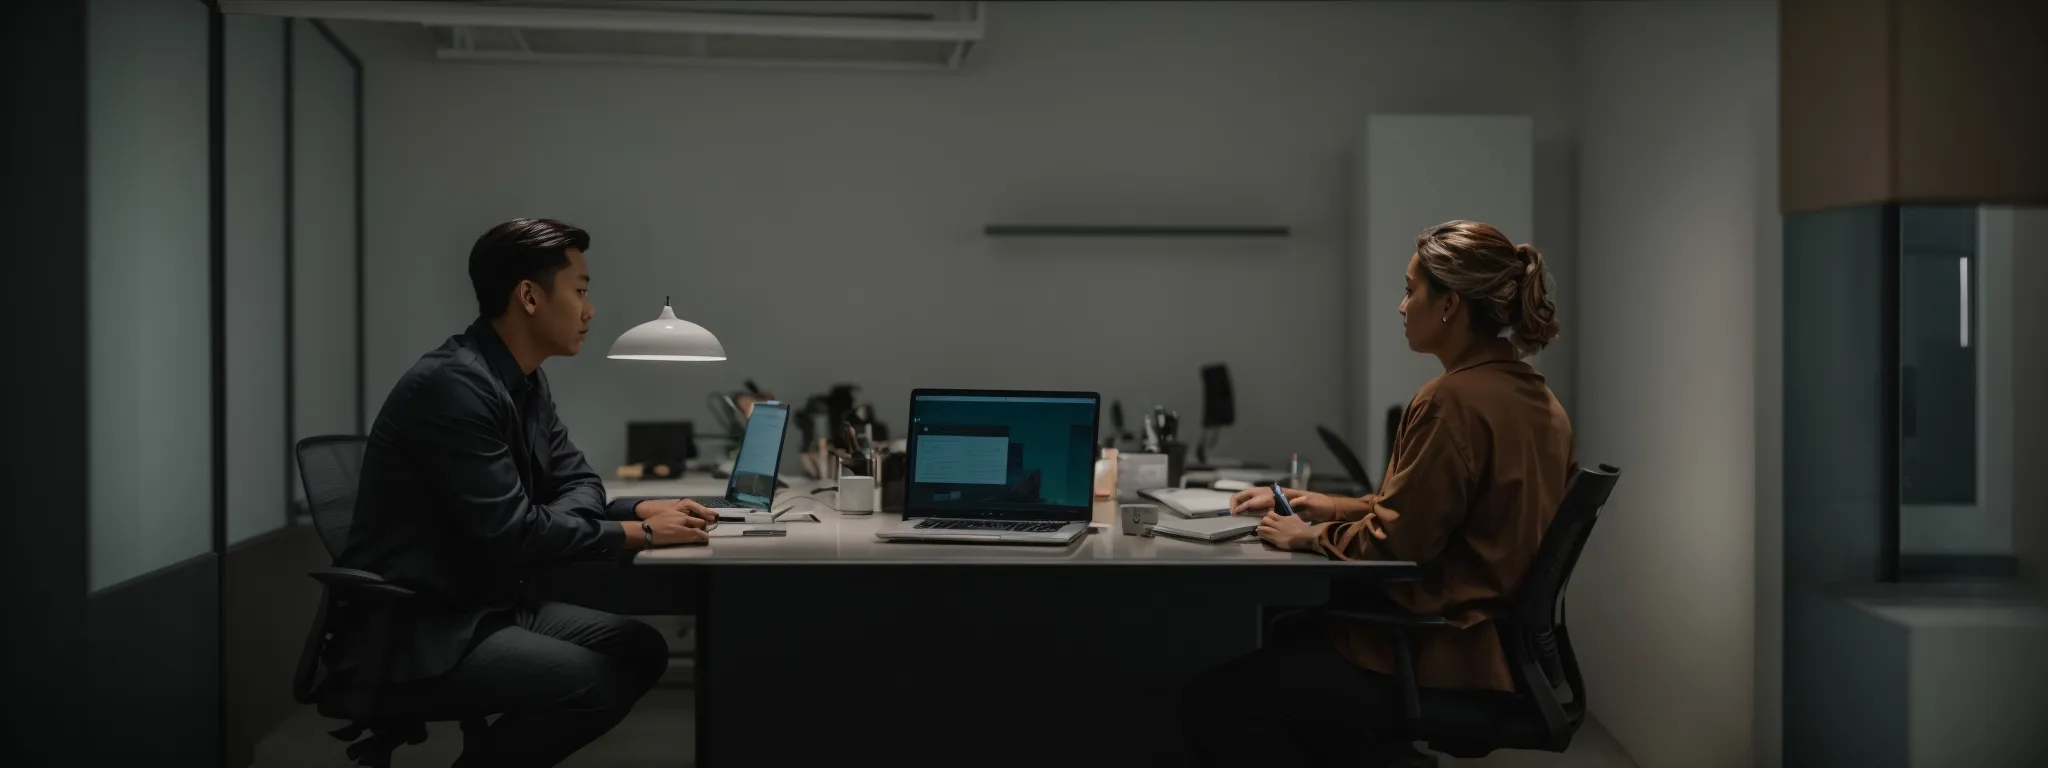 two professionals sit across from each other at a minimalist office desk, each intently focused on a laptop screen while discussing strategy.